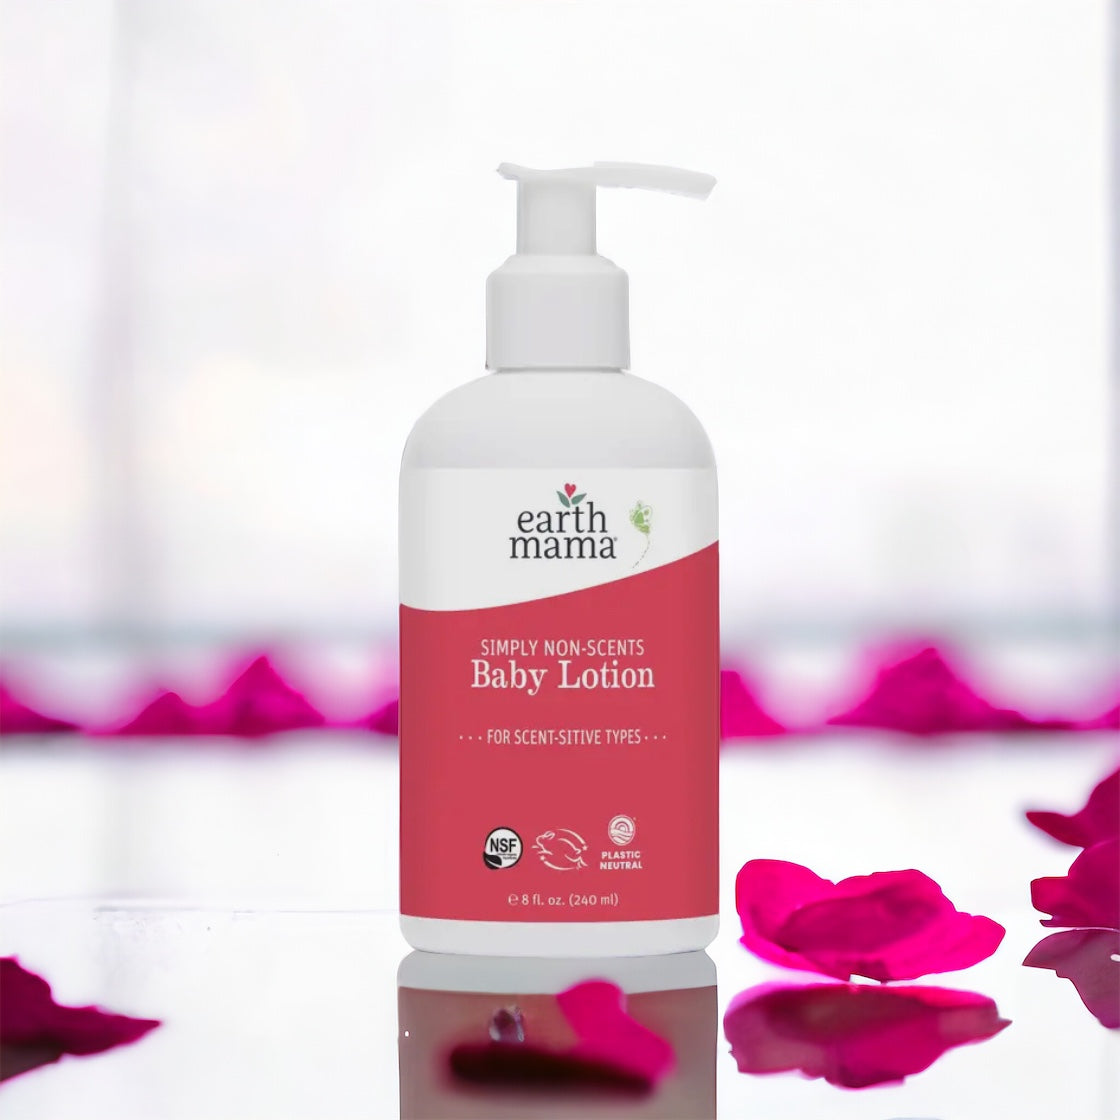 Simply Non-Scent Baby Lotion